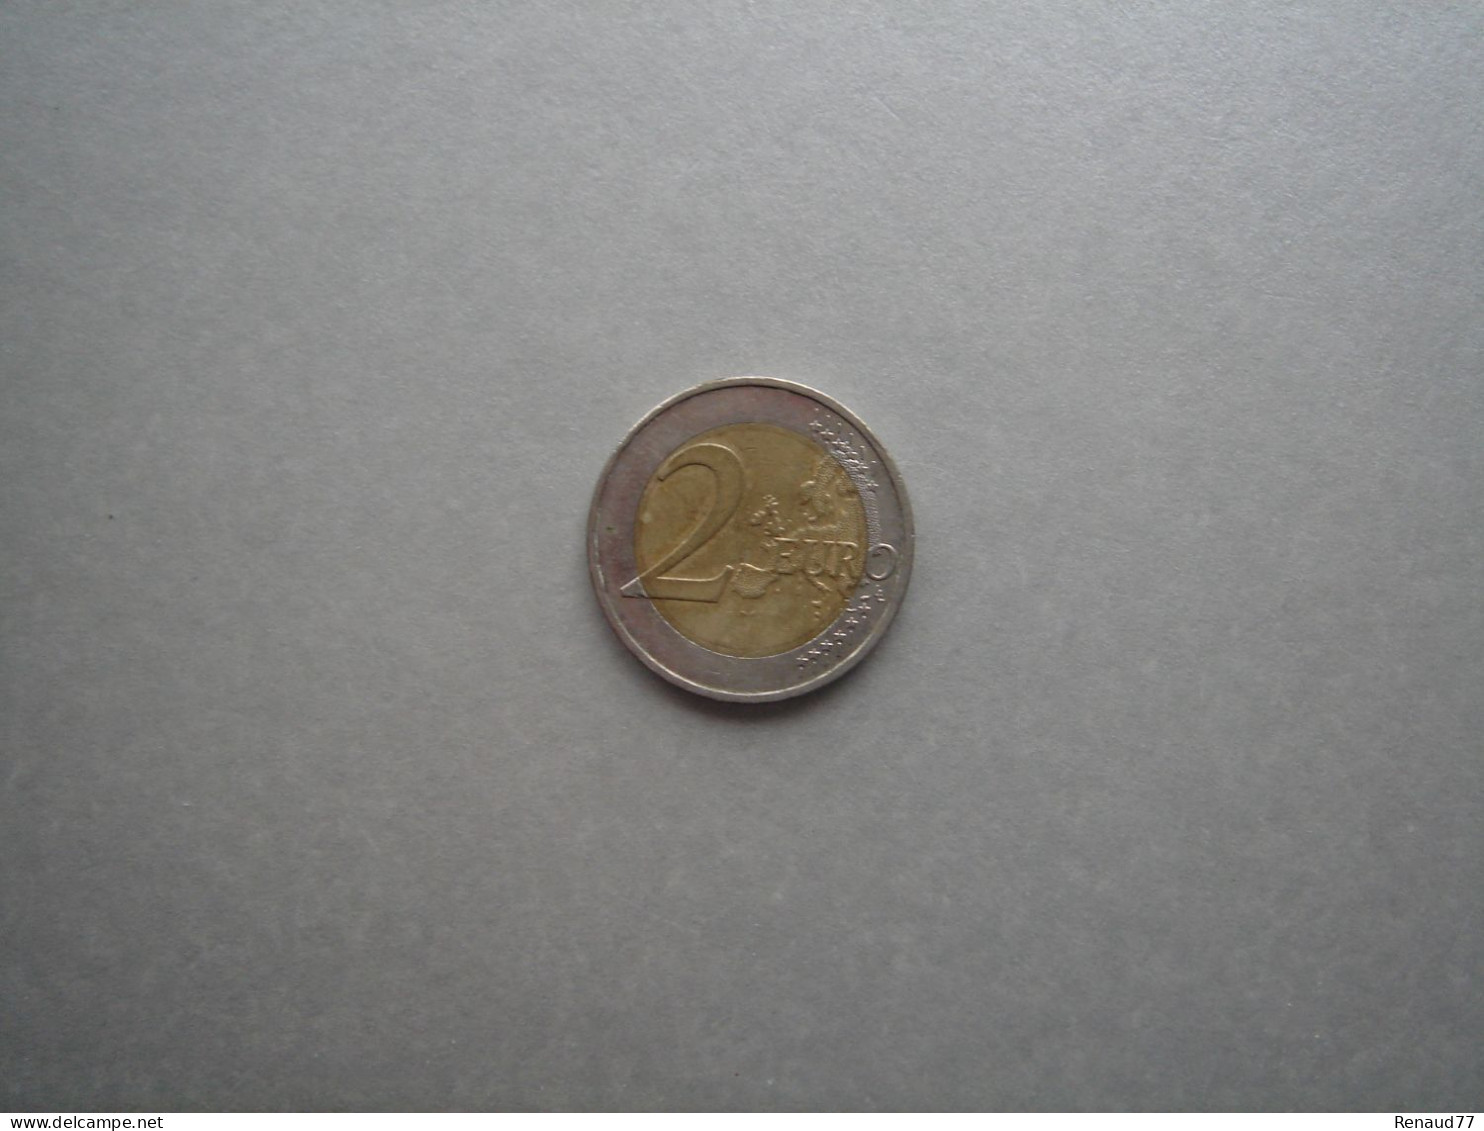 Germany - Allemagne - Duitsland 2 EURO 2007 F Speciale Uitgave - Commemorative - Belgio